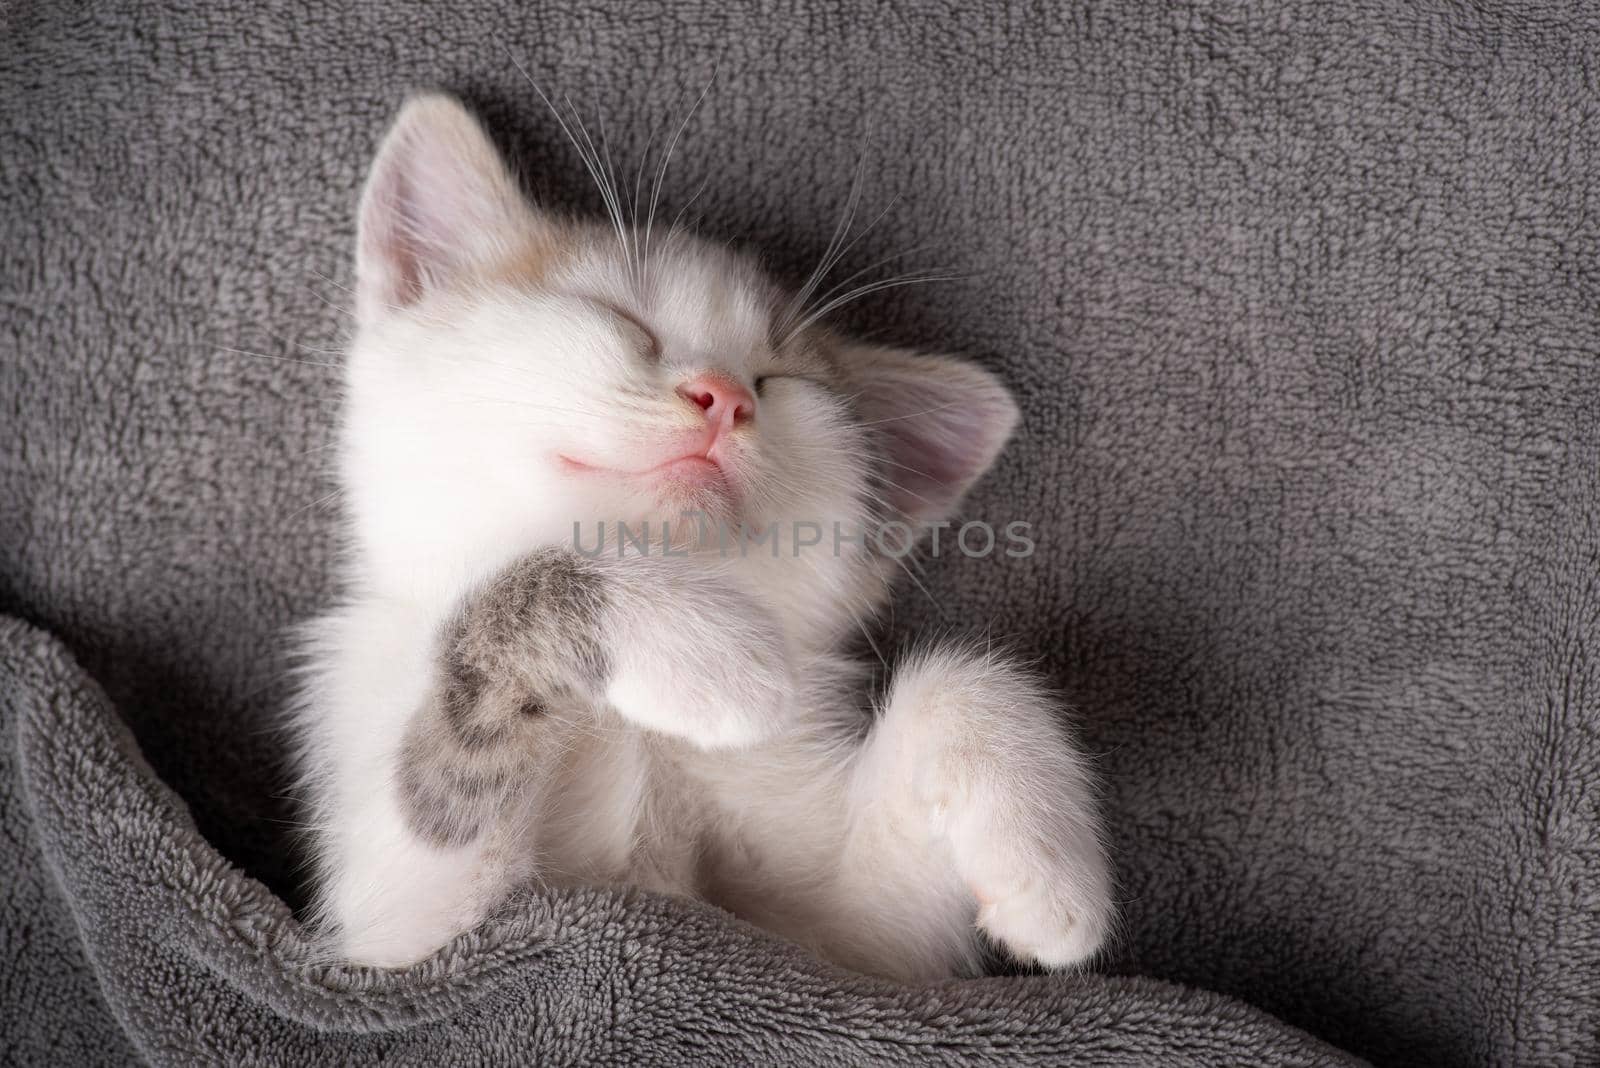 Adorable kitten having a rest on gray plaid